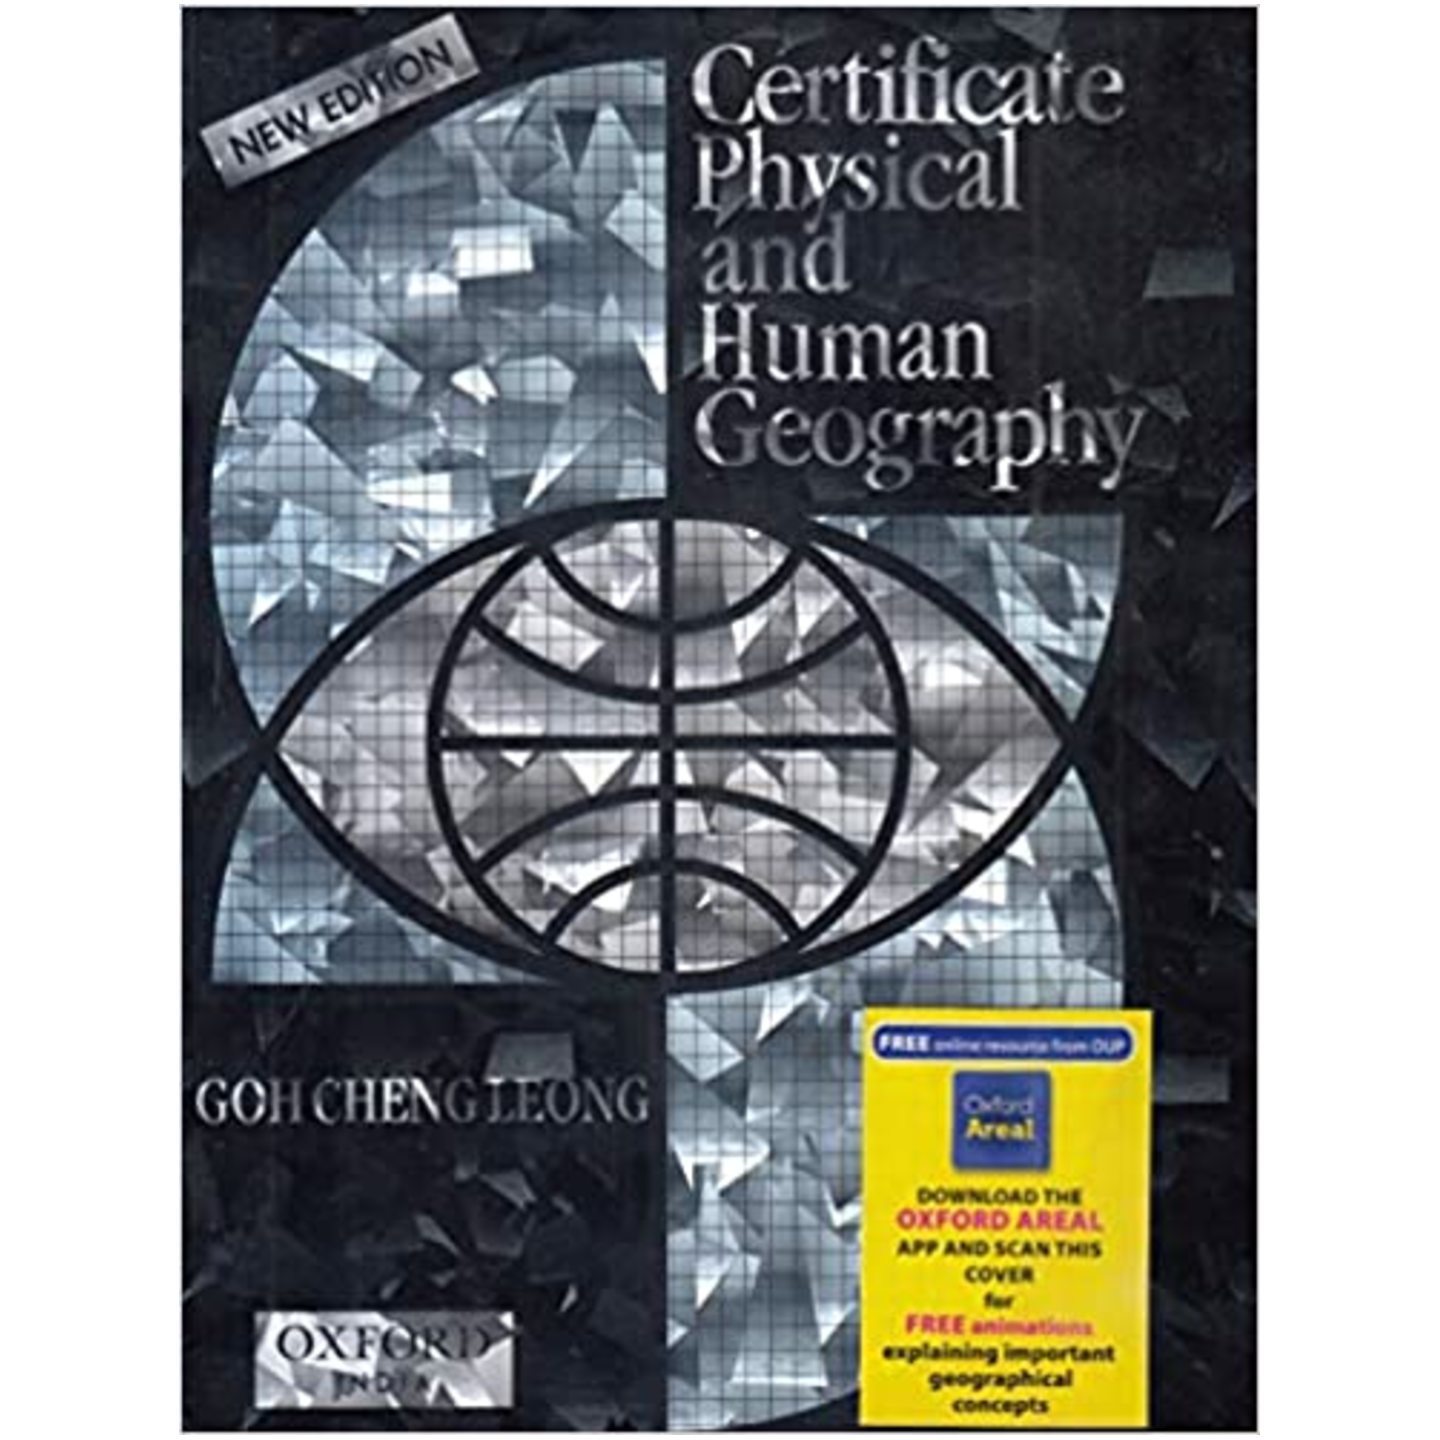 Certificate Physical And Human Geography Indian Edition GOH CHENG LEONG